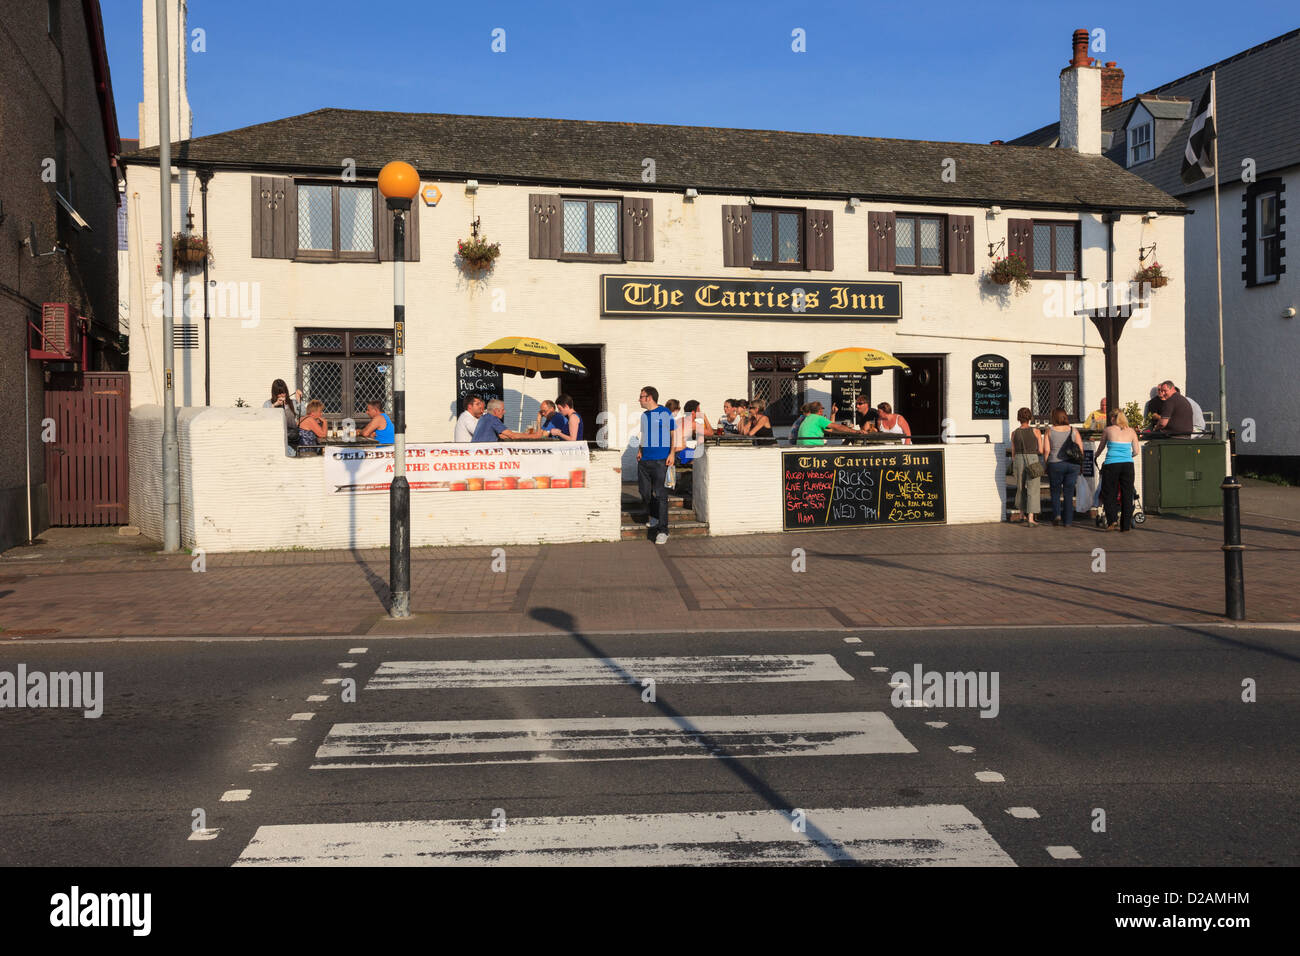 People sitting drinking outside the Carriers Inn roadside town pub on a sunny evening in Bude, Cornwall, England, UK, Britain Stock Photo